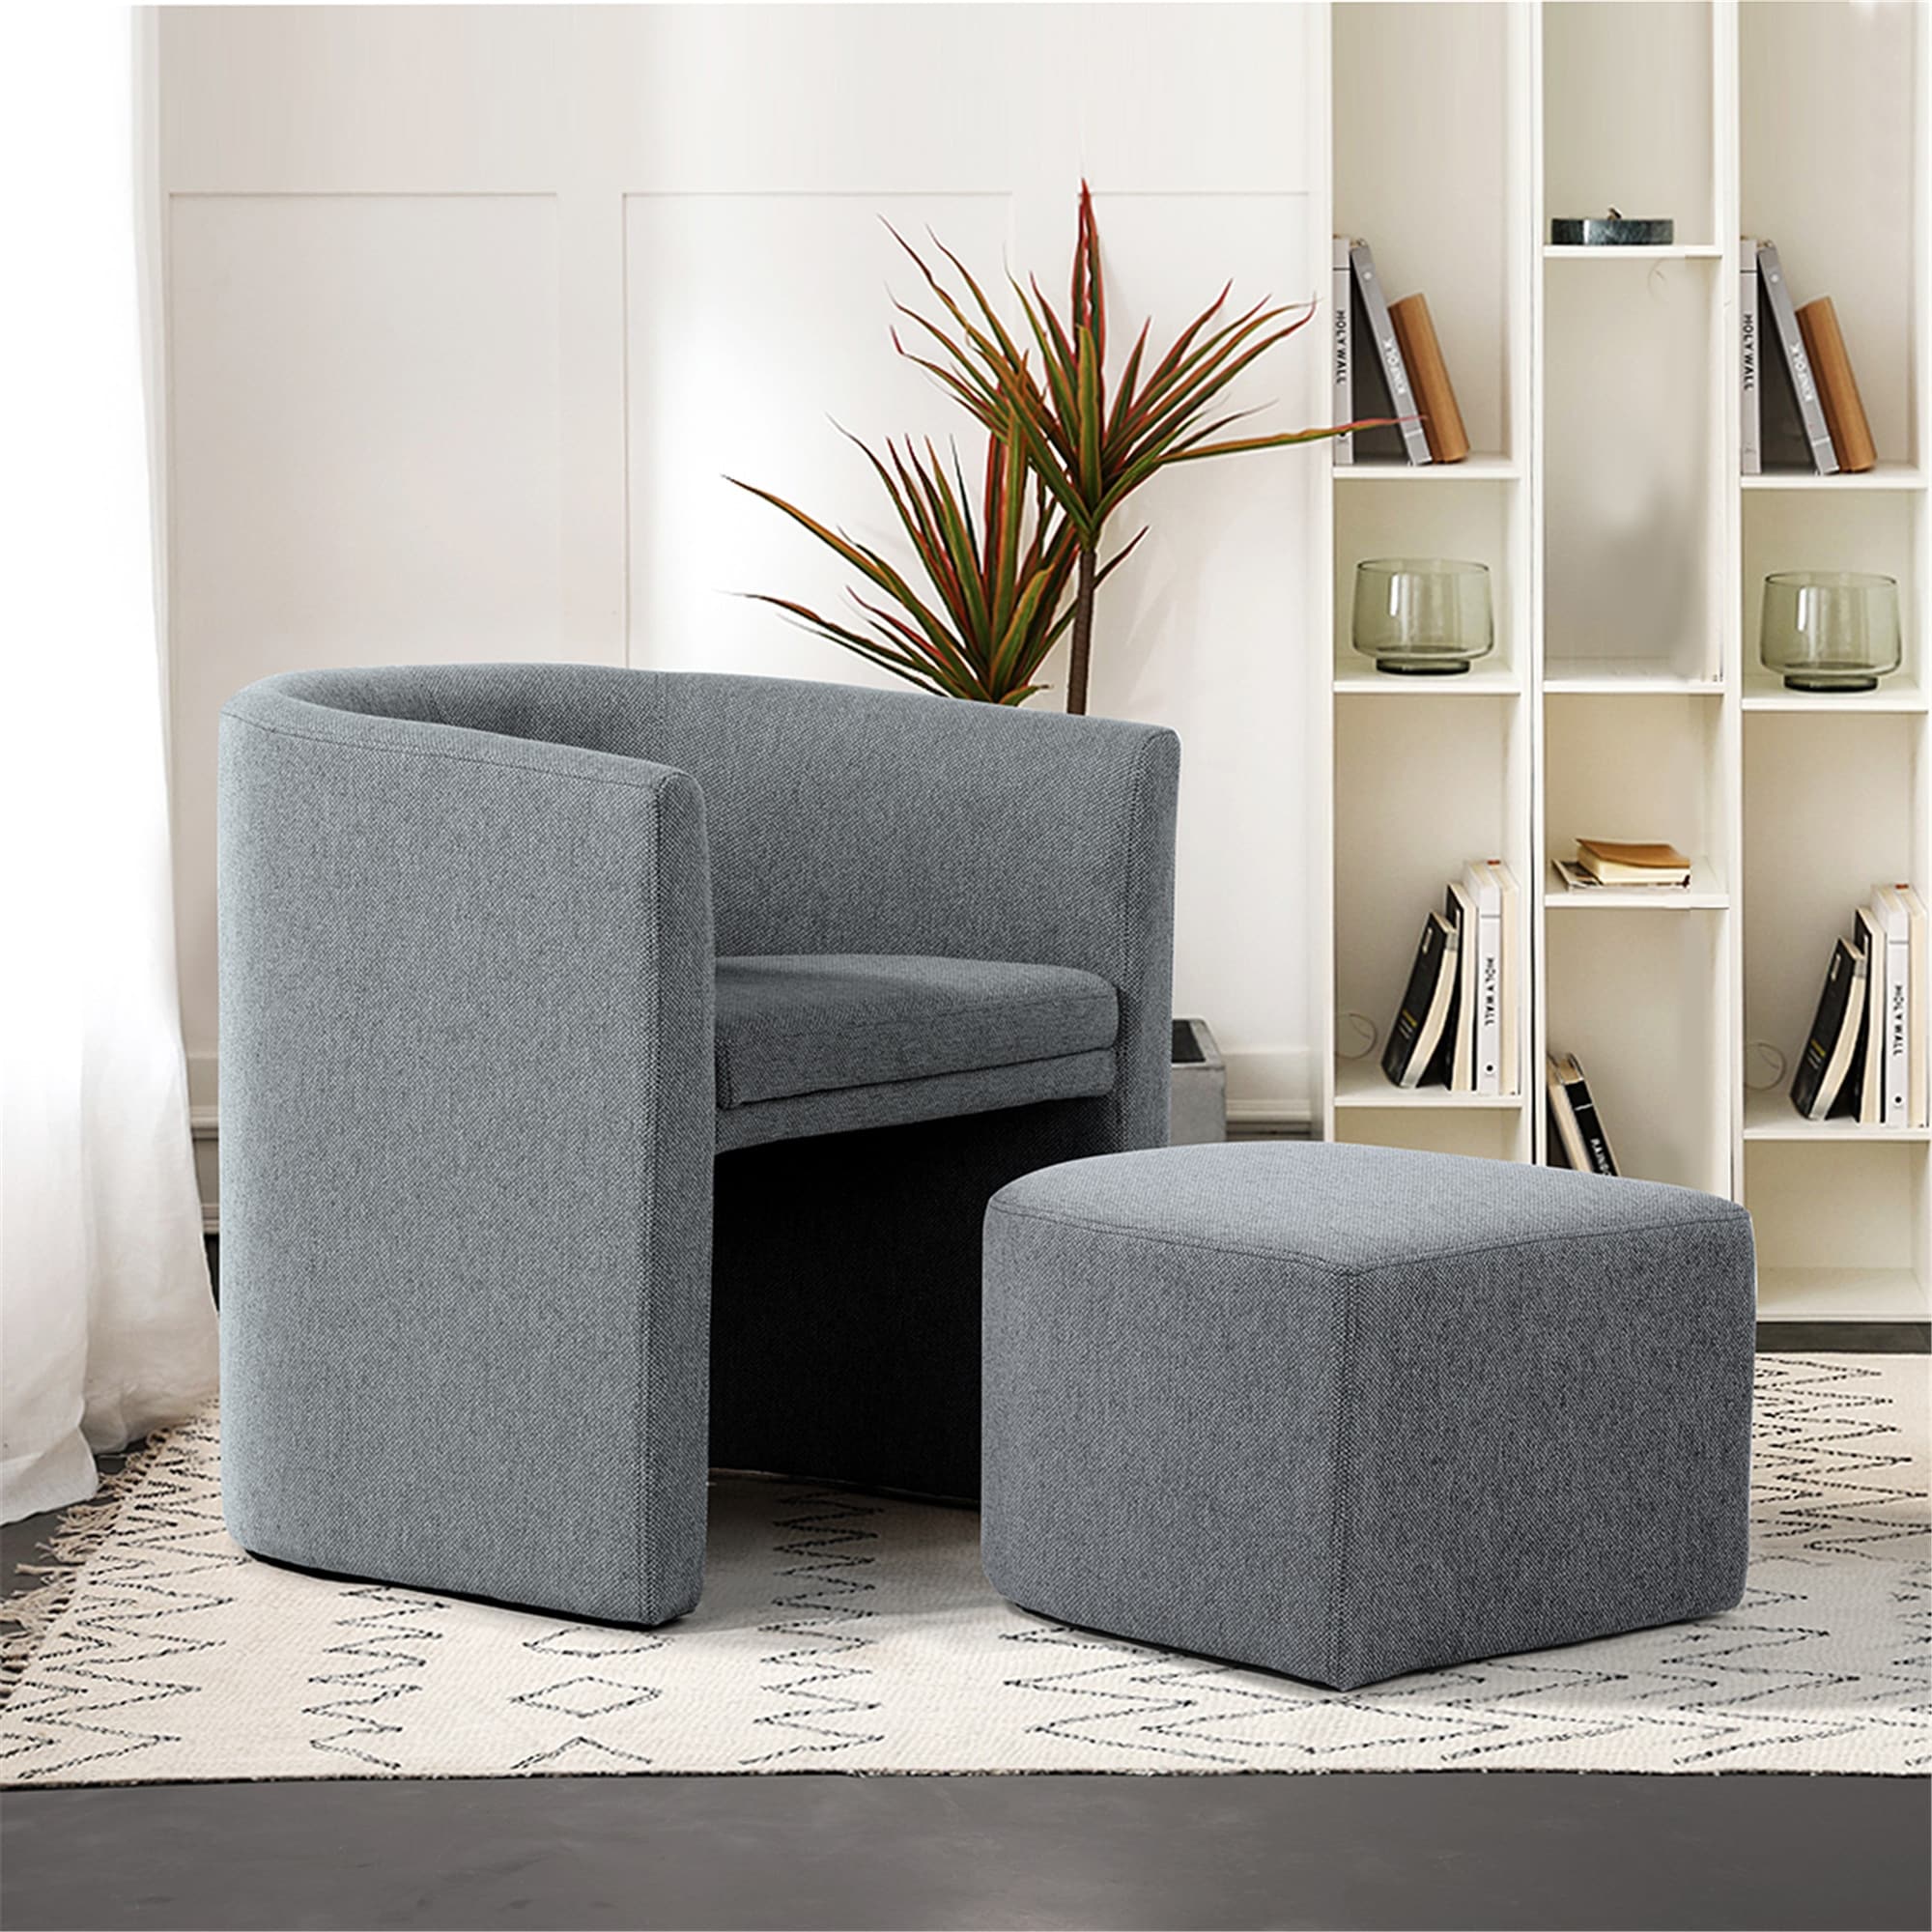 Furniture R Living Room Accent Chair With Ottoman Overstock 31647041